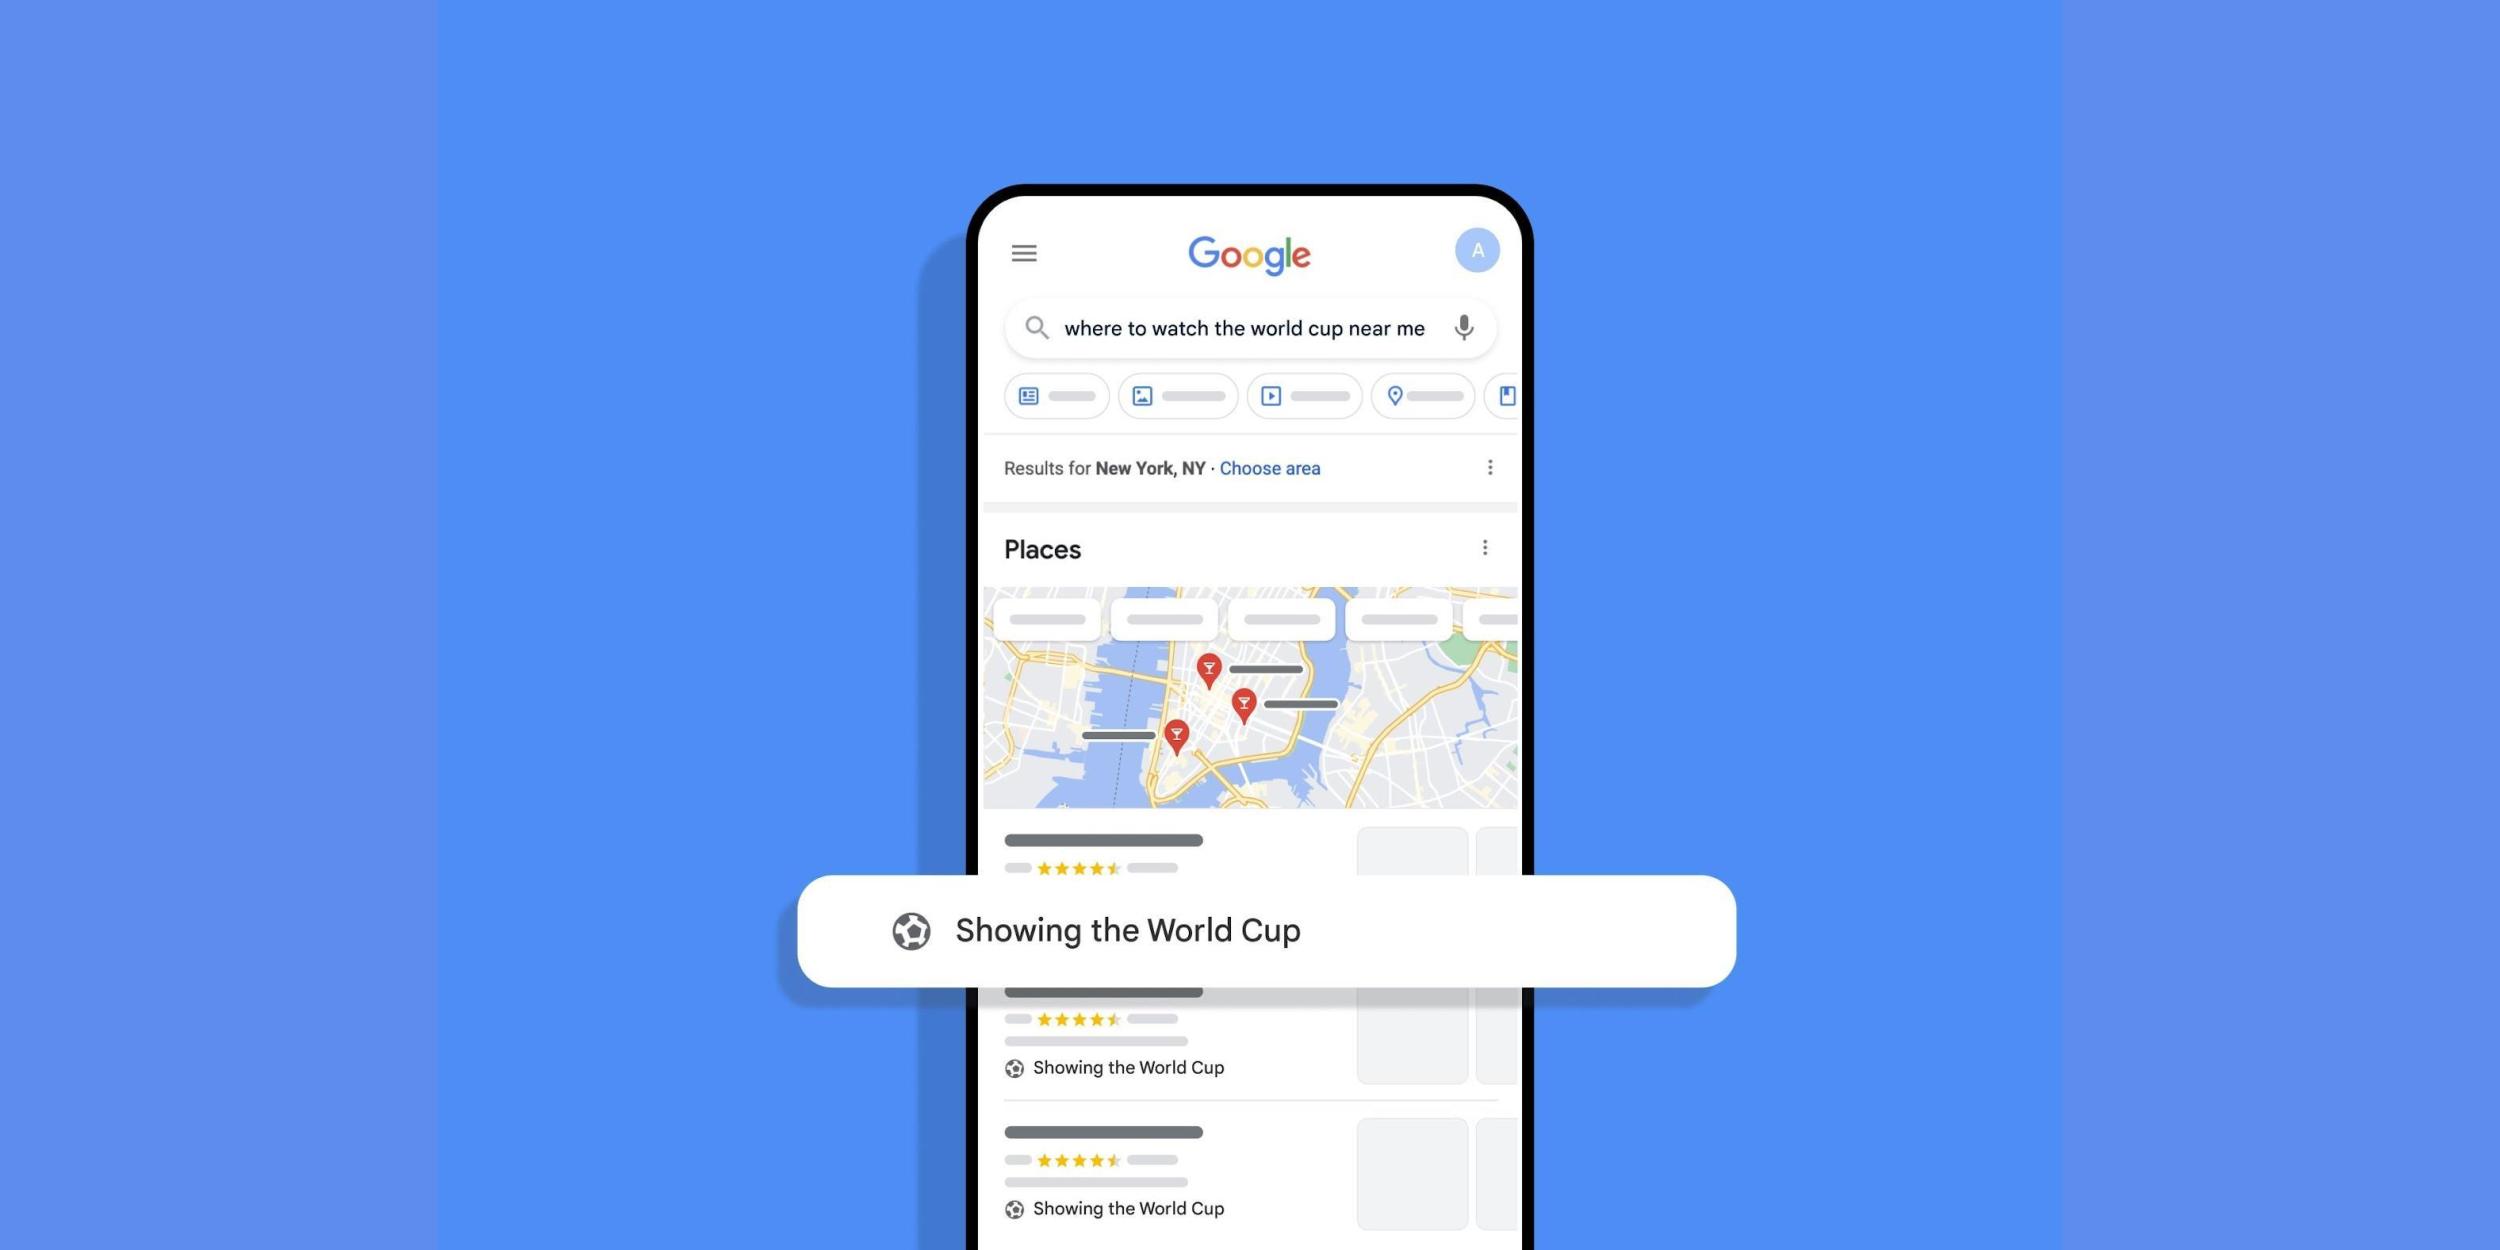 Google Duplex powering where to watch World Cup near me